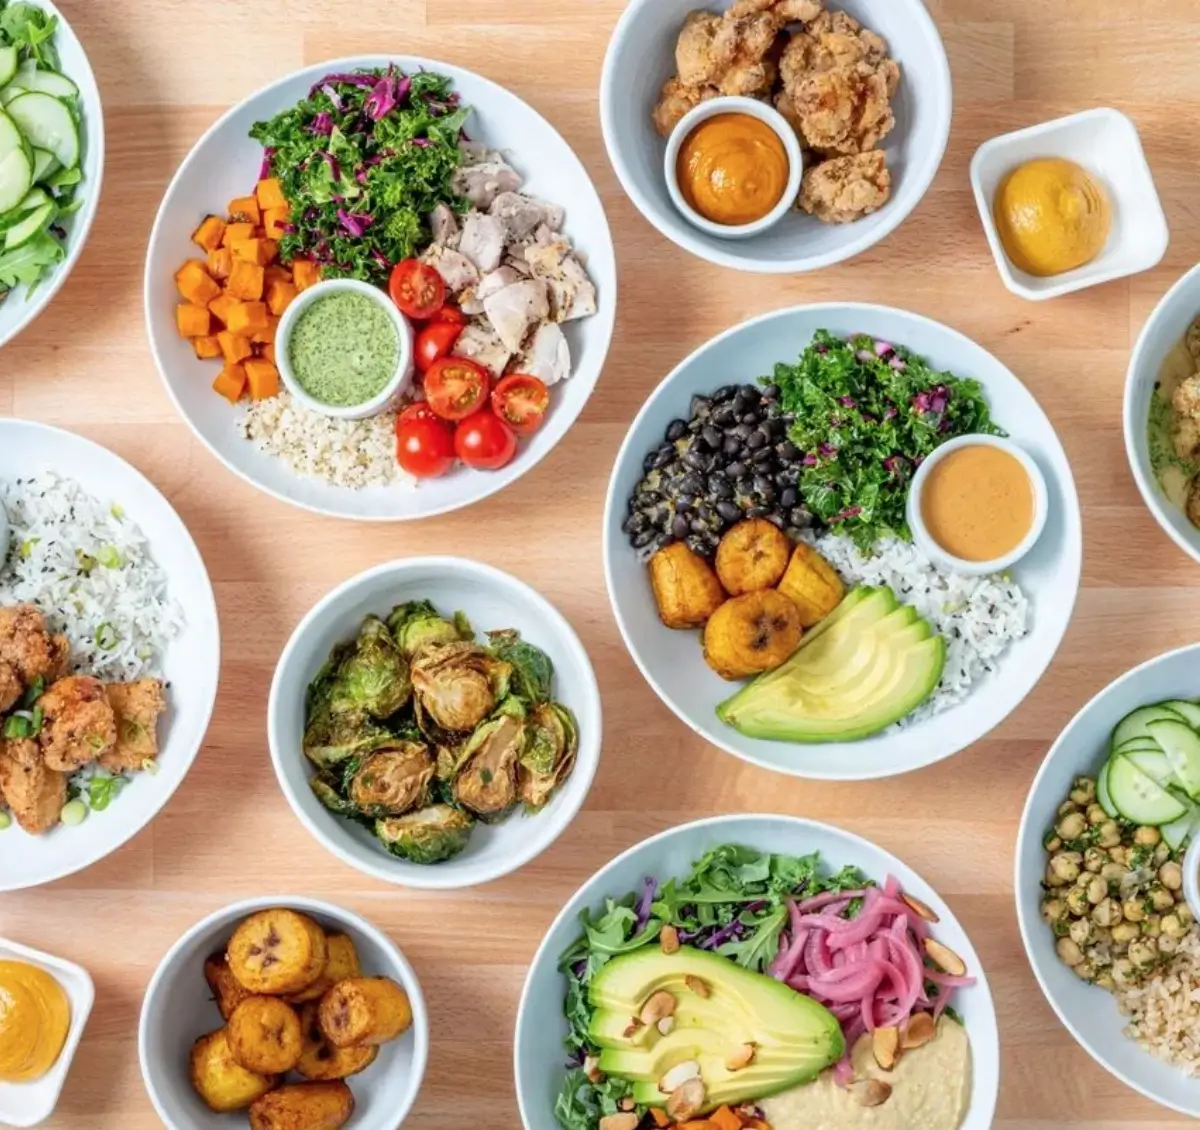 An array of healthy bowls of rice, veggies, protein, and sauces on a wooden background